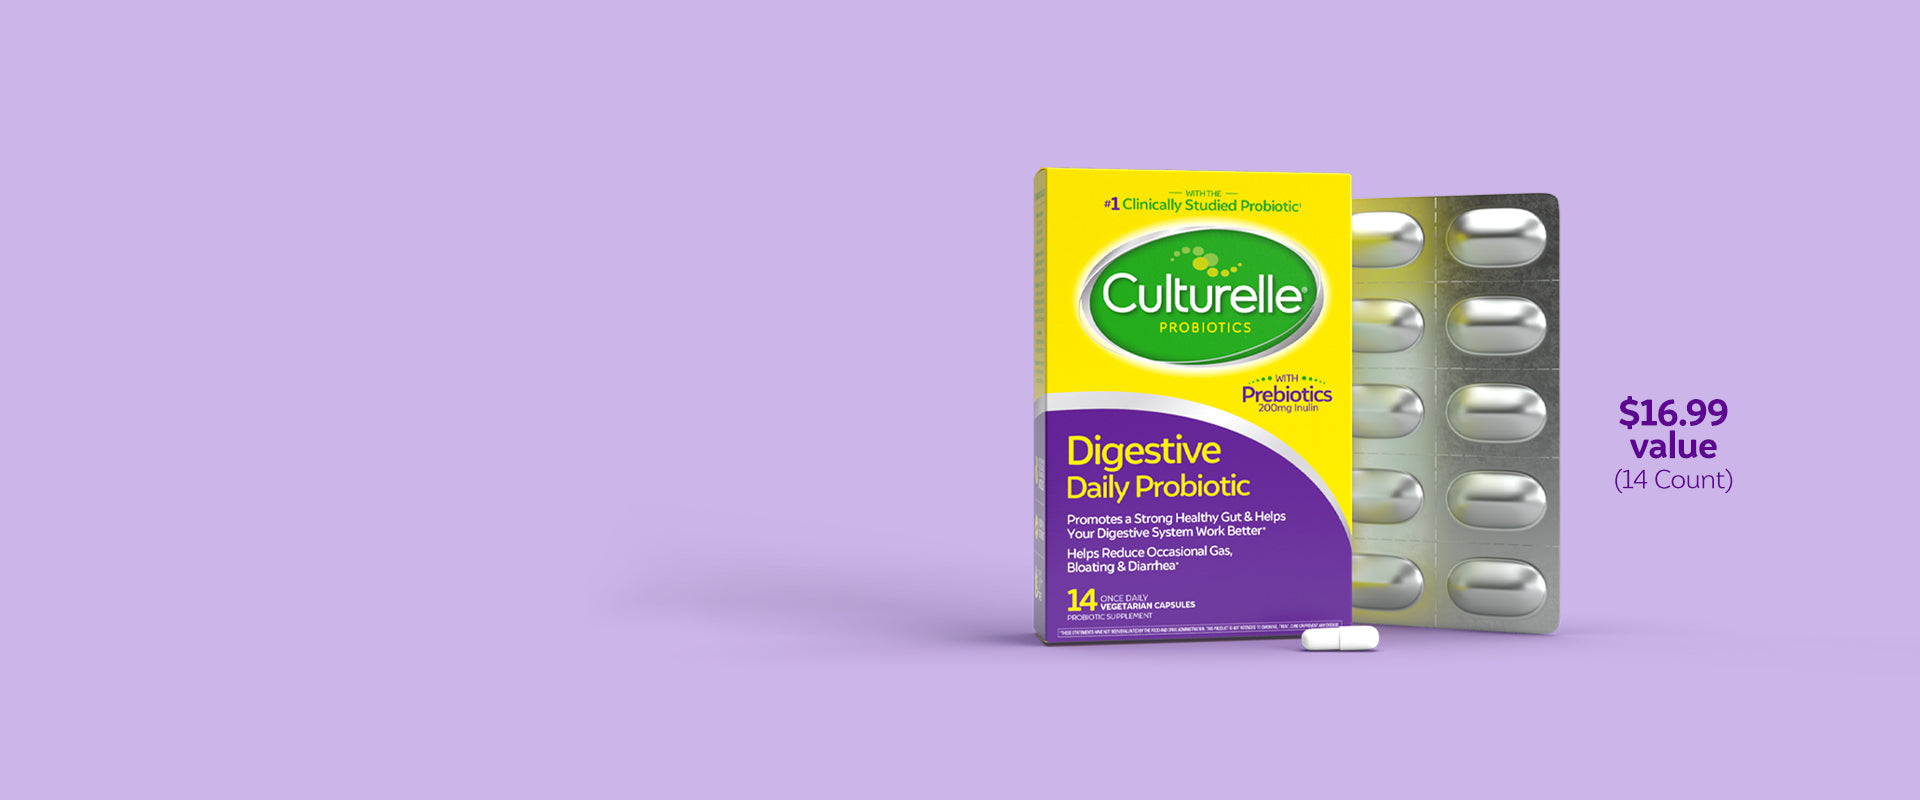 Digestive Daily Probiotic packaging $16.99 value (14 count)